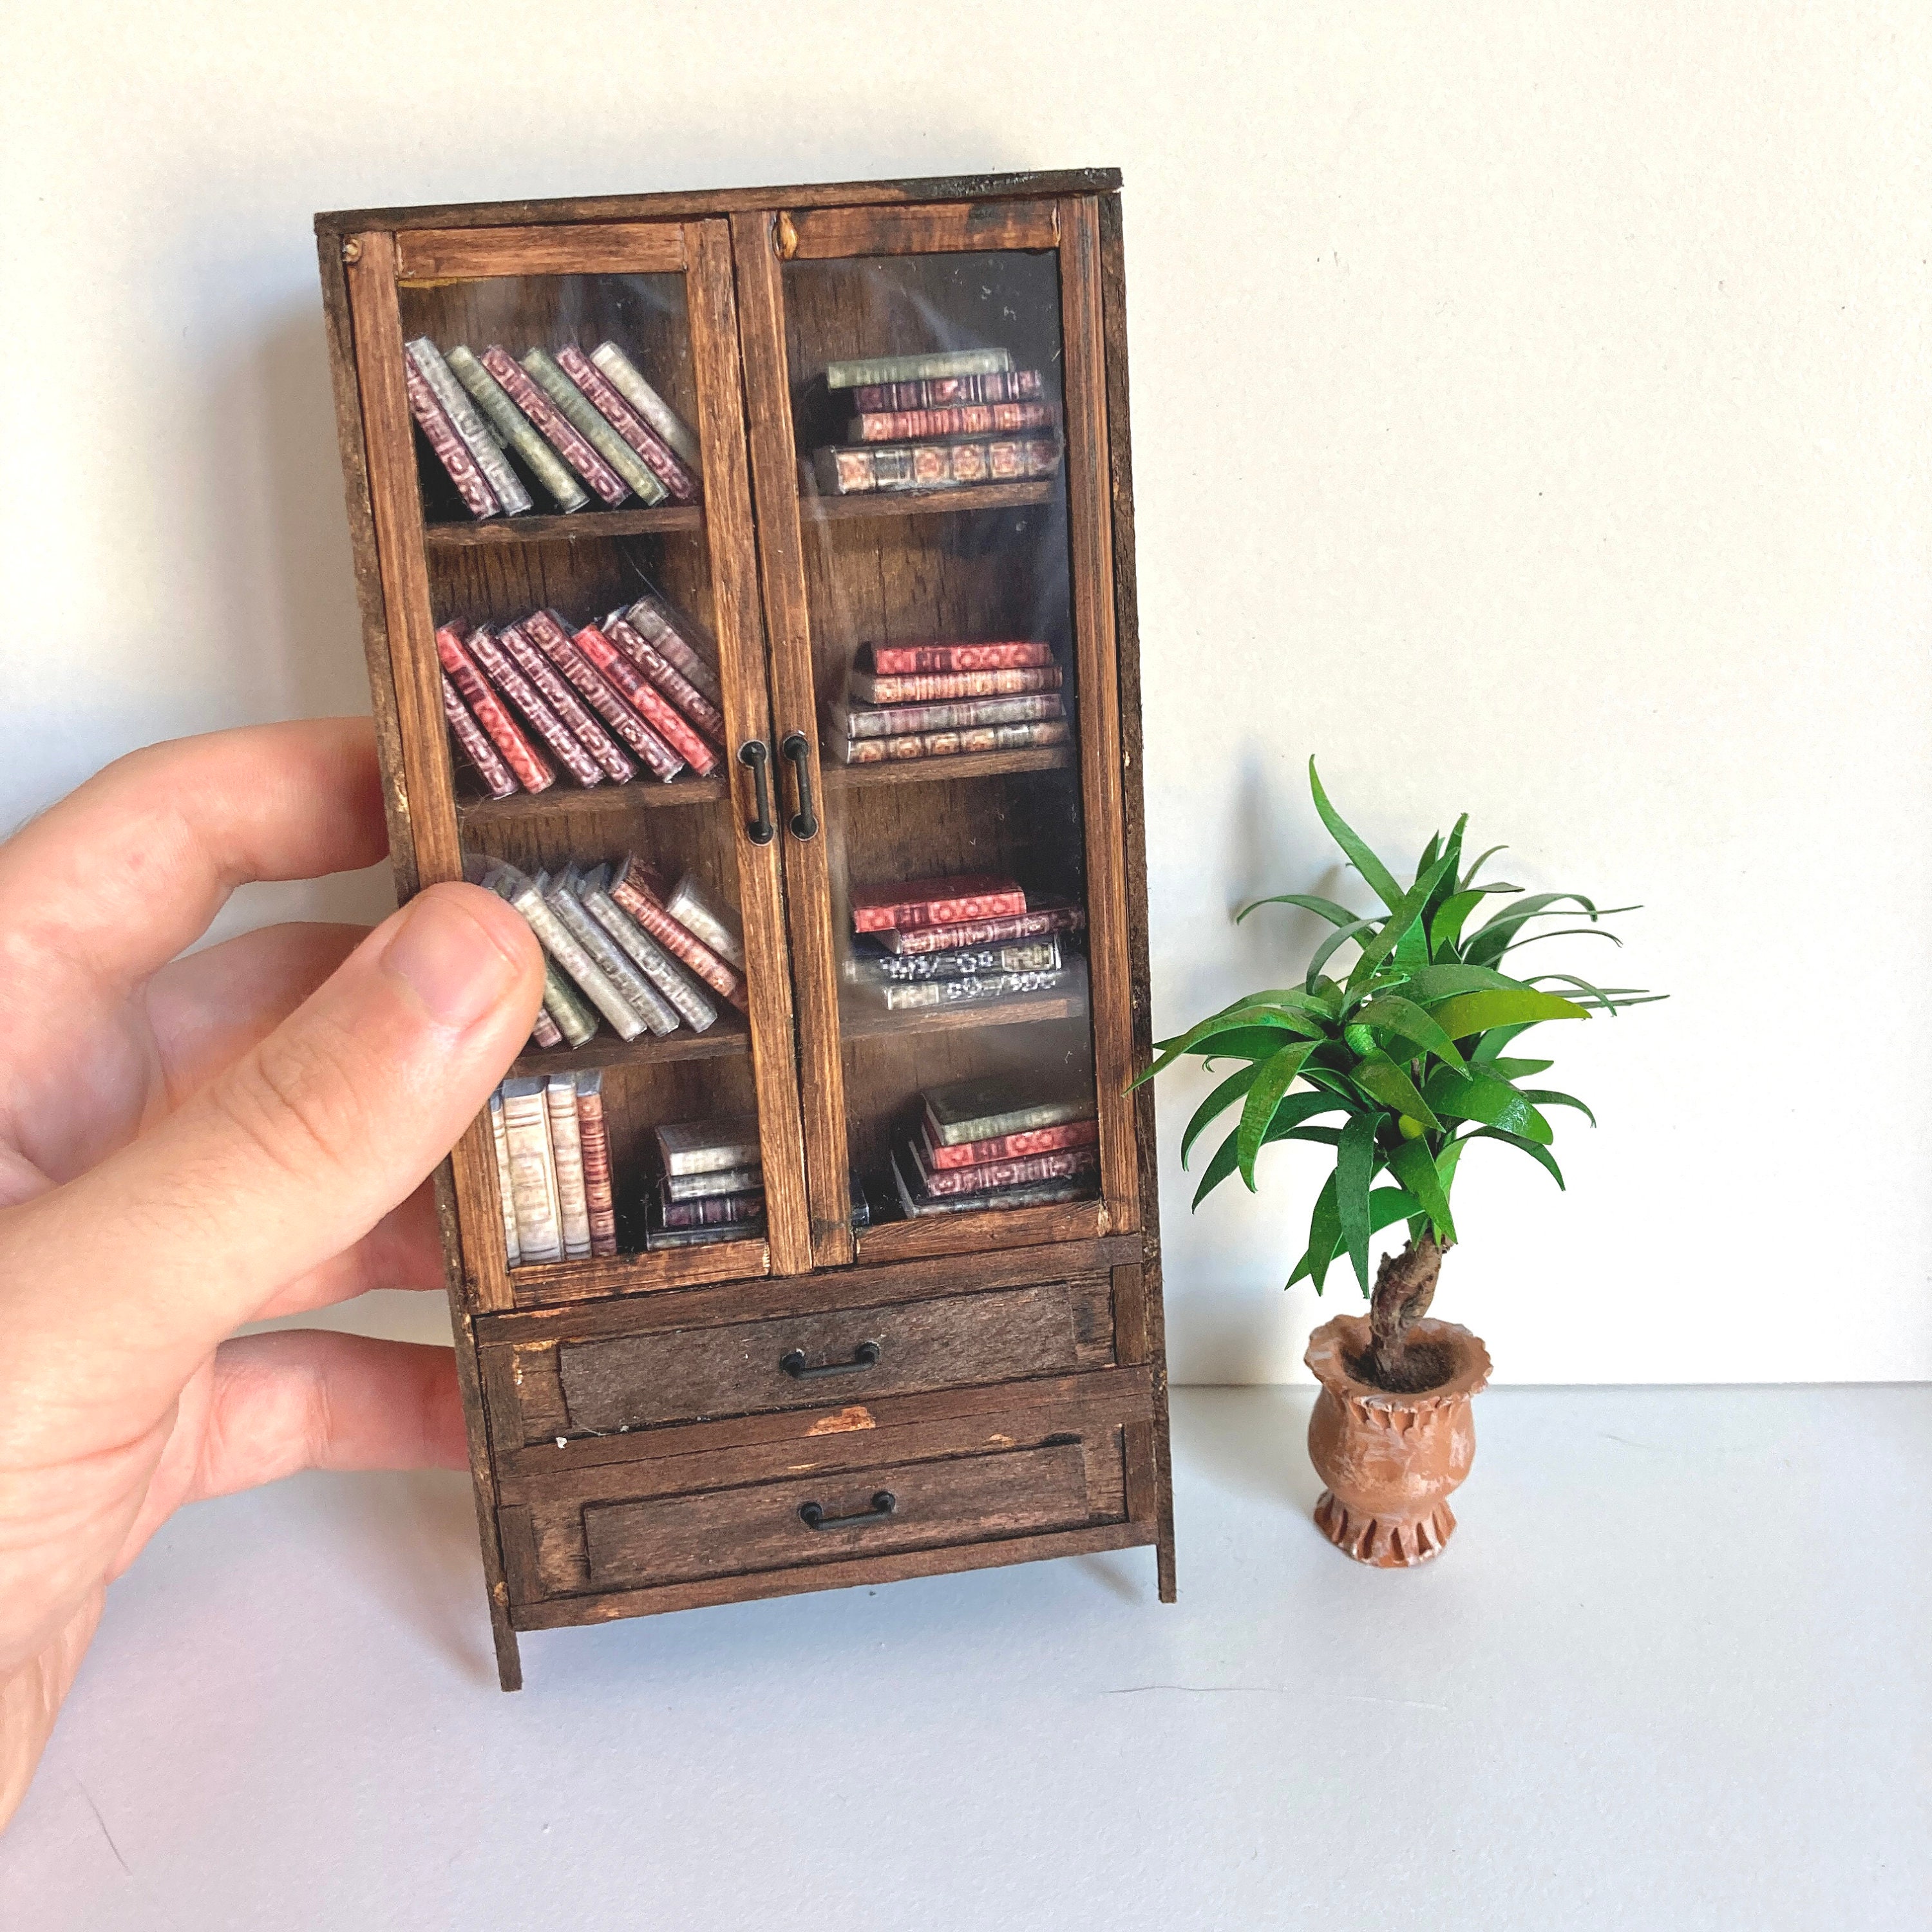 Manwang Colorful Decorative Book Anxiety Bookshelf with Wooden